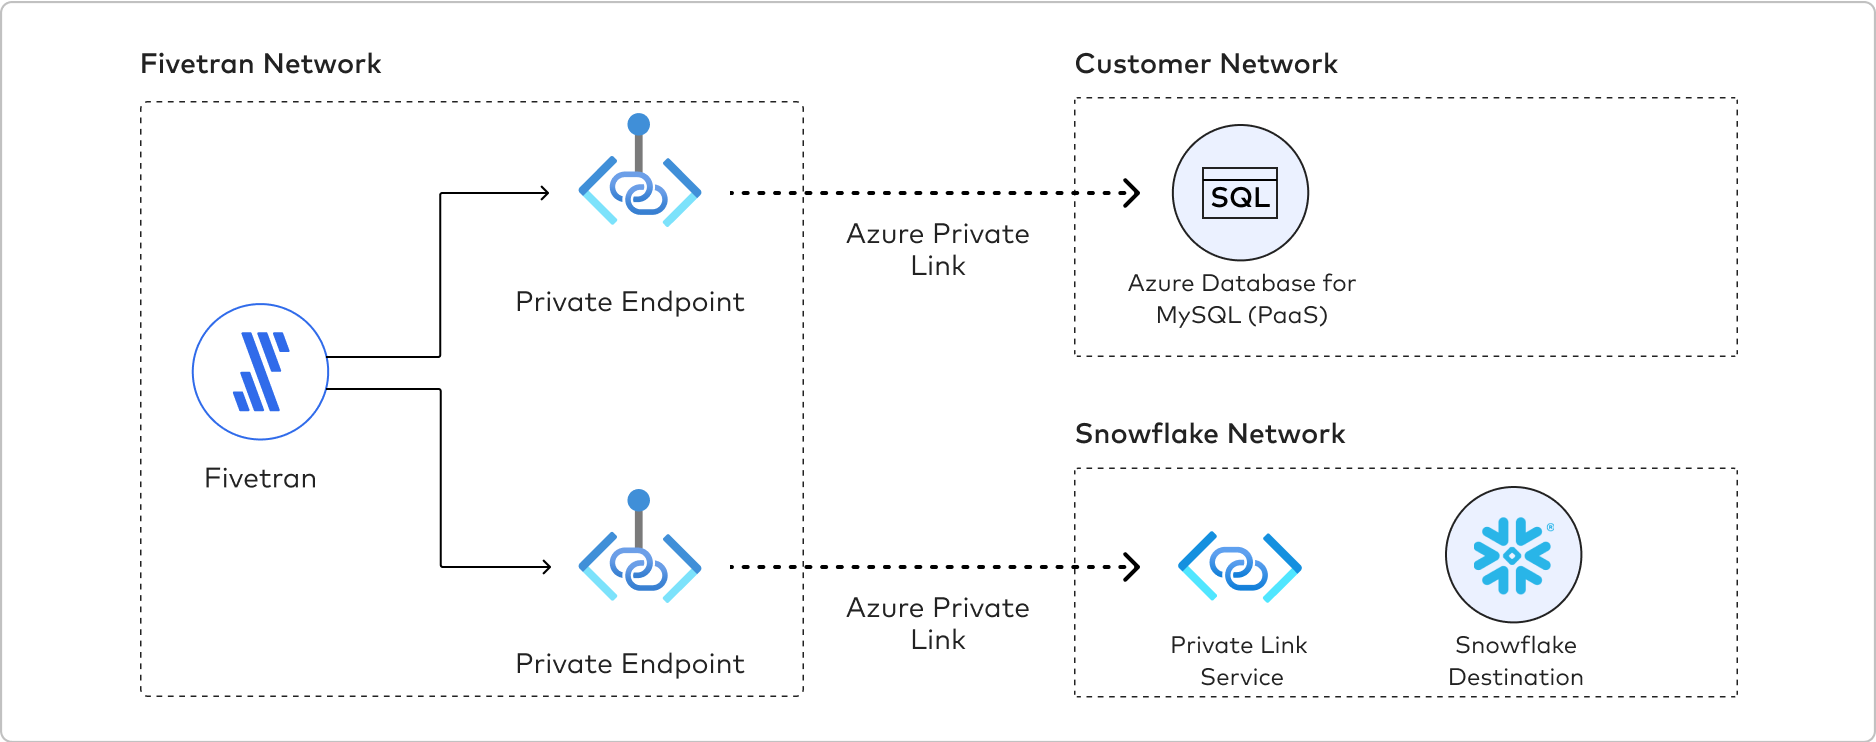 Visualization of Fivetran's network configuration with Azure PrivateLink